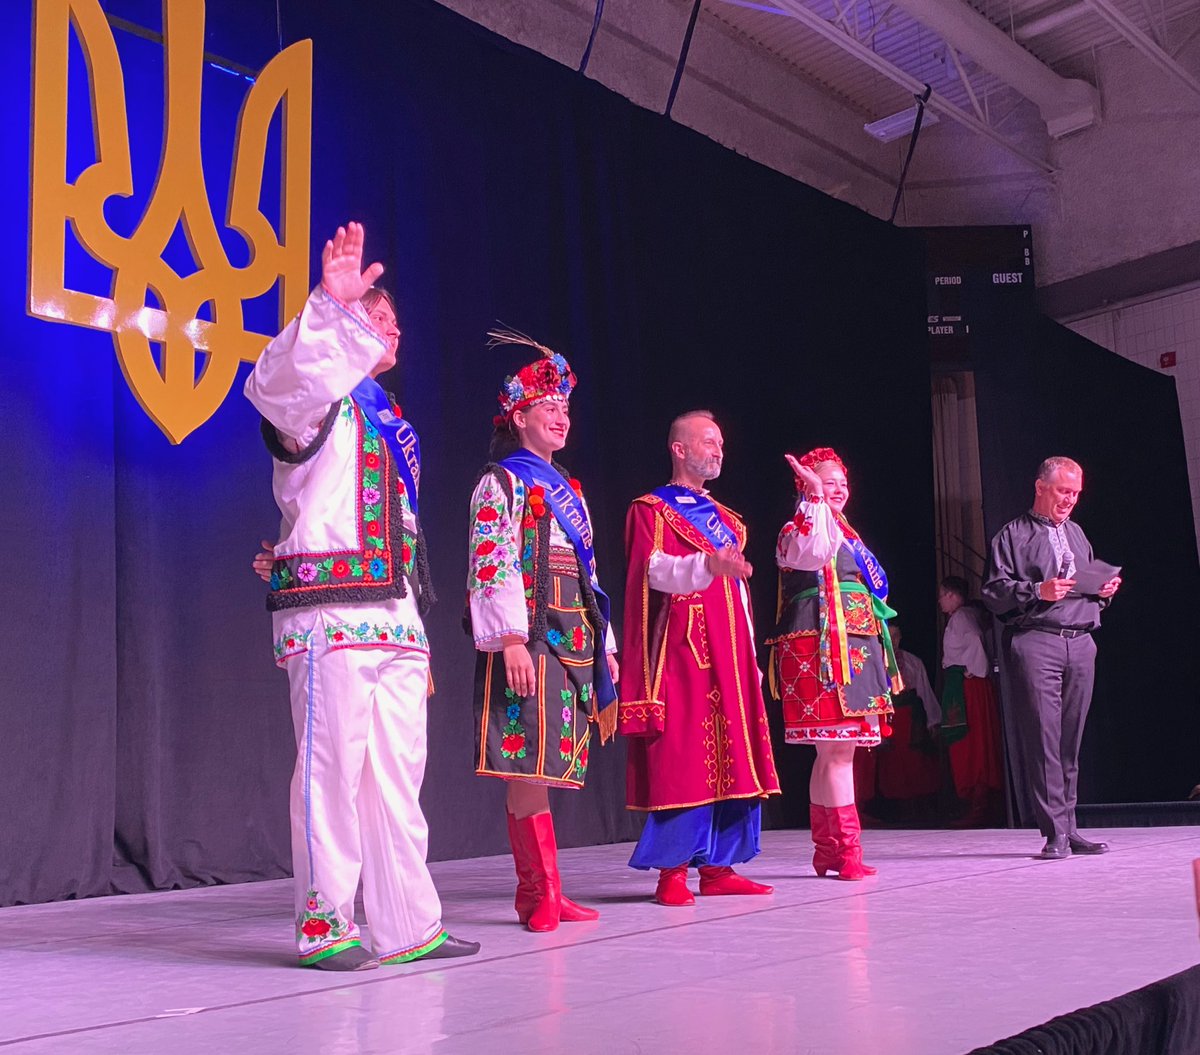 test Twitter Media - The Ukraine-Kyiv pavilion tonight was absolutely beautiful.❤️
So many emotions packed into the performance and felt by all who attended. @Folklorama 
#SlavaUkraini 🇺🇦 https://t.co/5FPteNfK8l